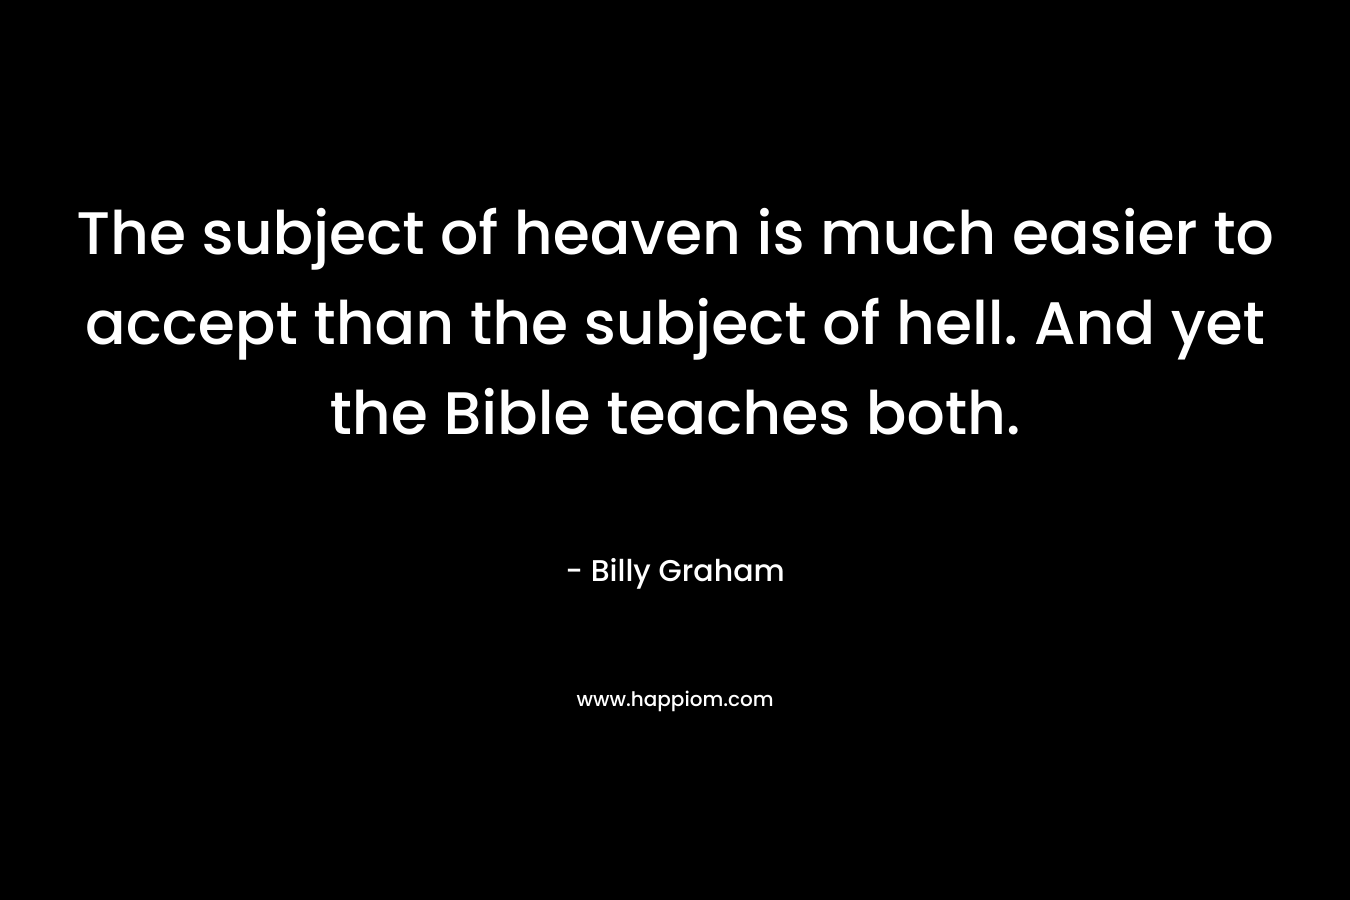 The subject of heaven is much easier to accept than the subject of hell. And yet the Bible teaches both.